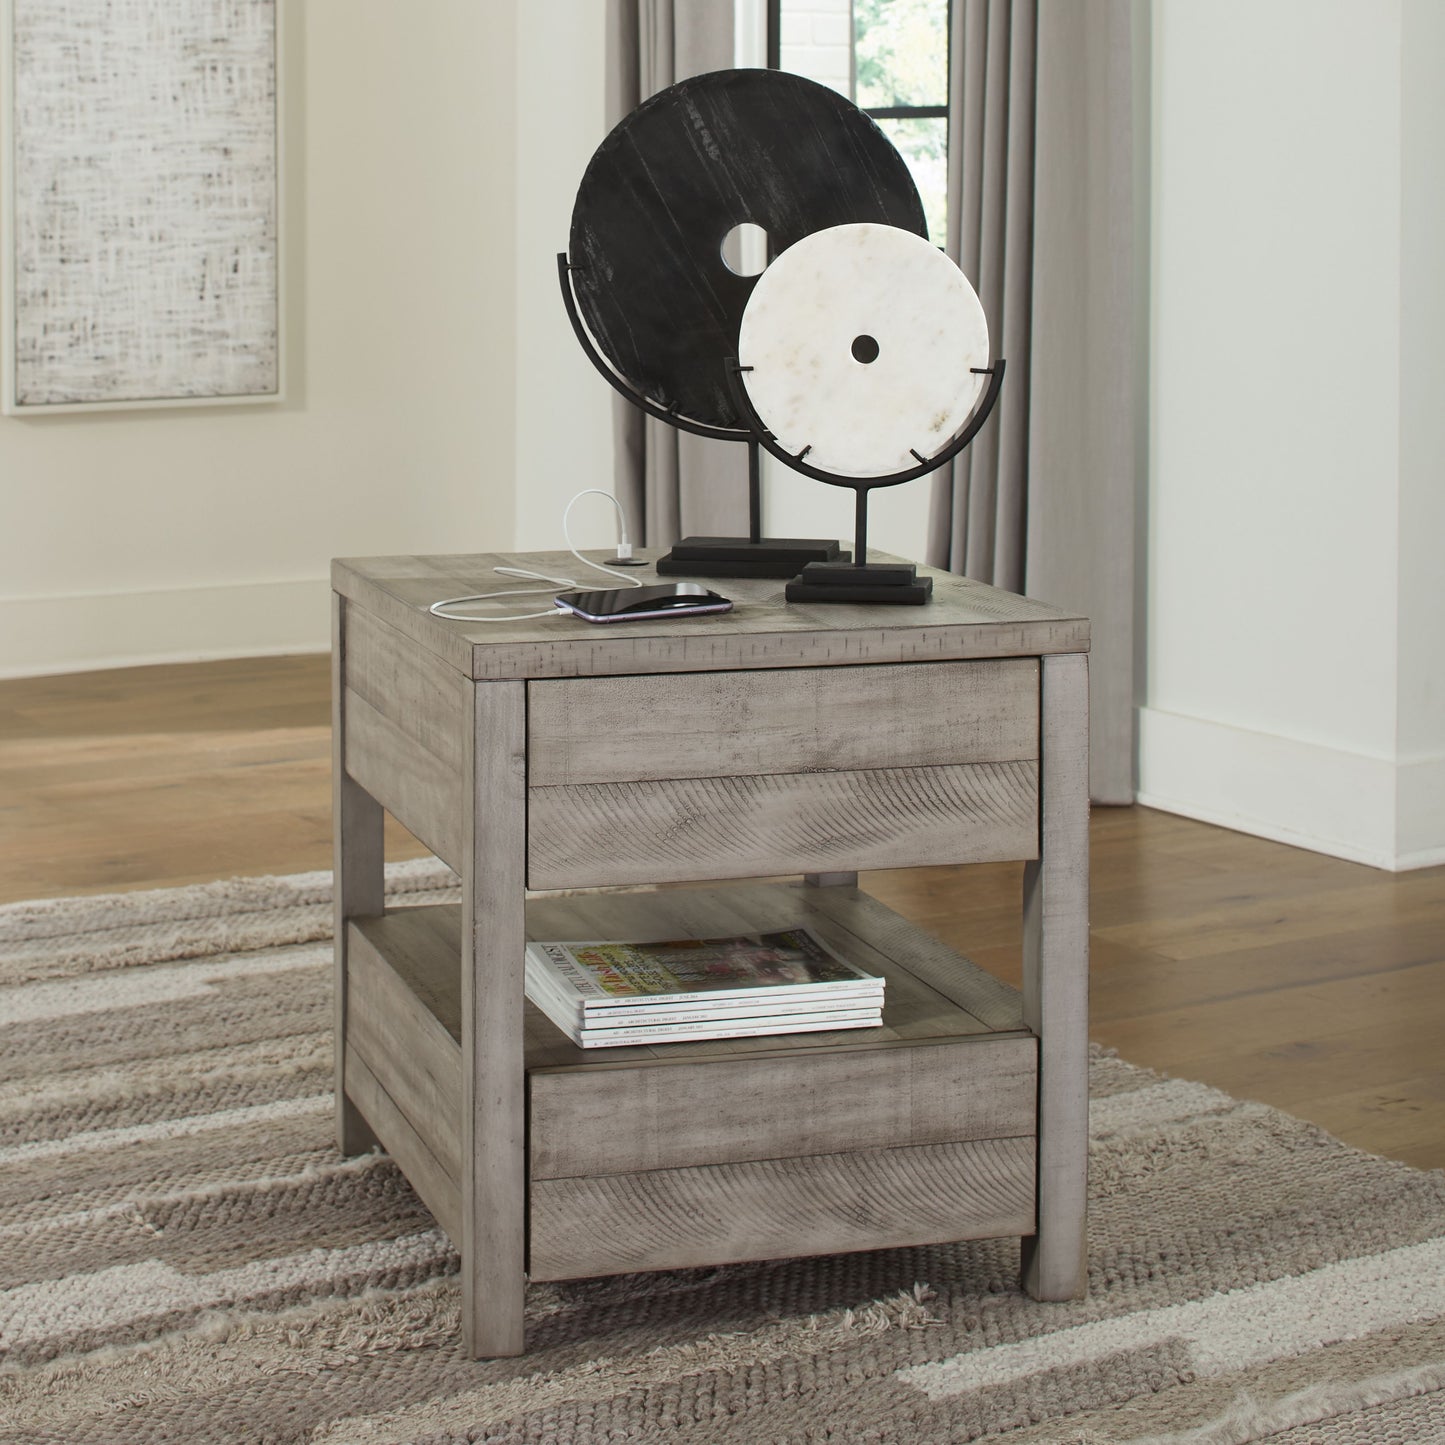 Naydell - Gray - Rectangular End Table